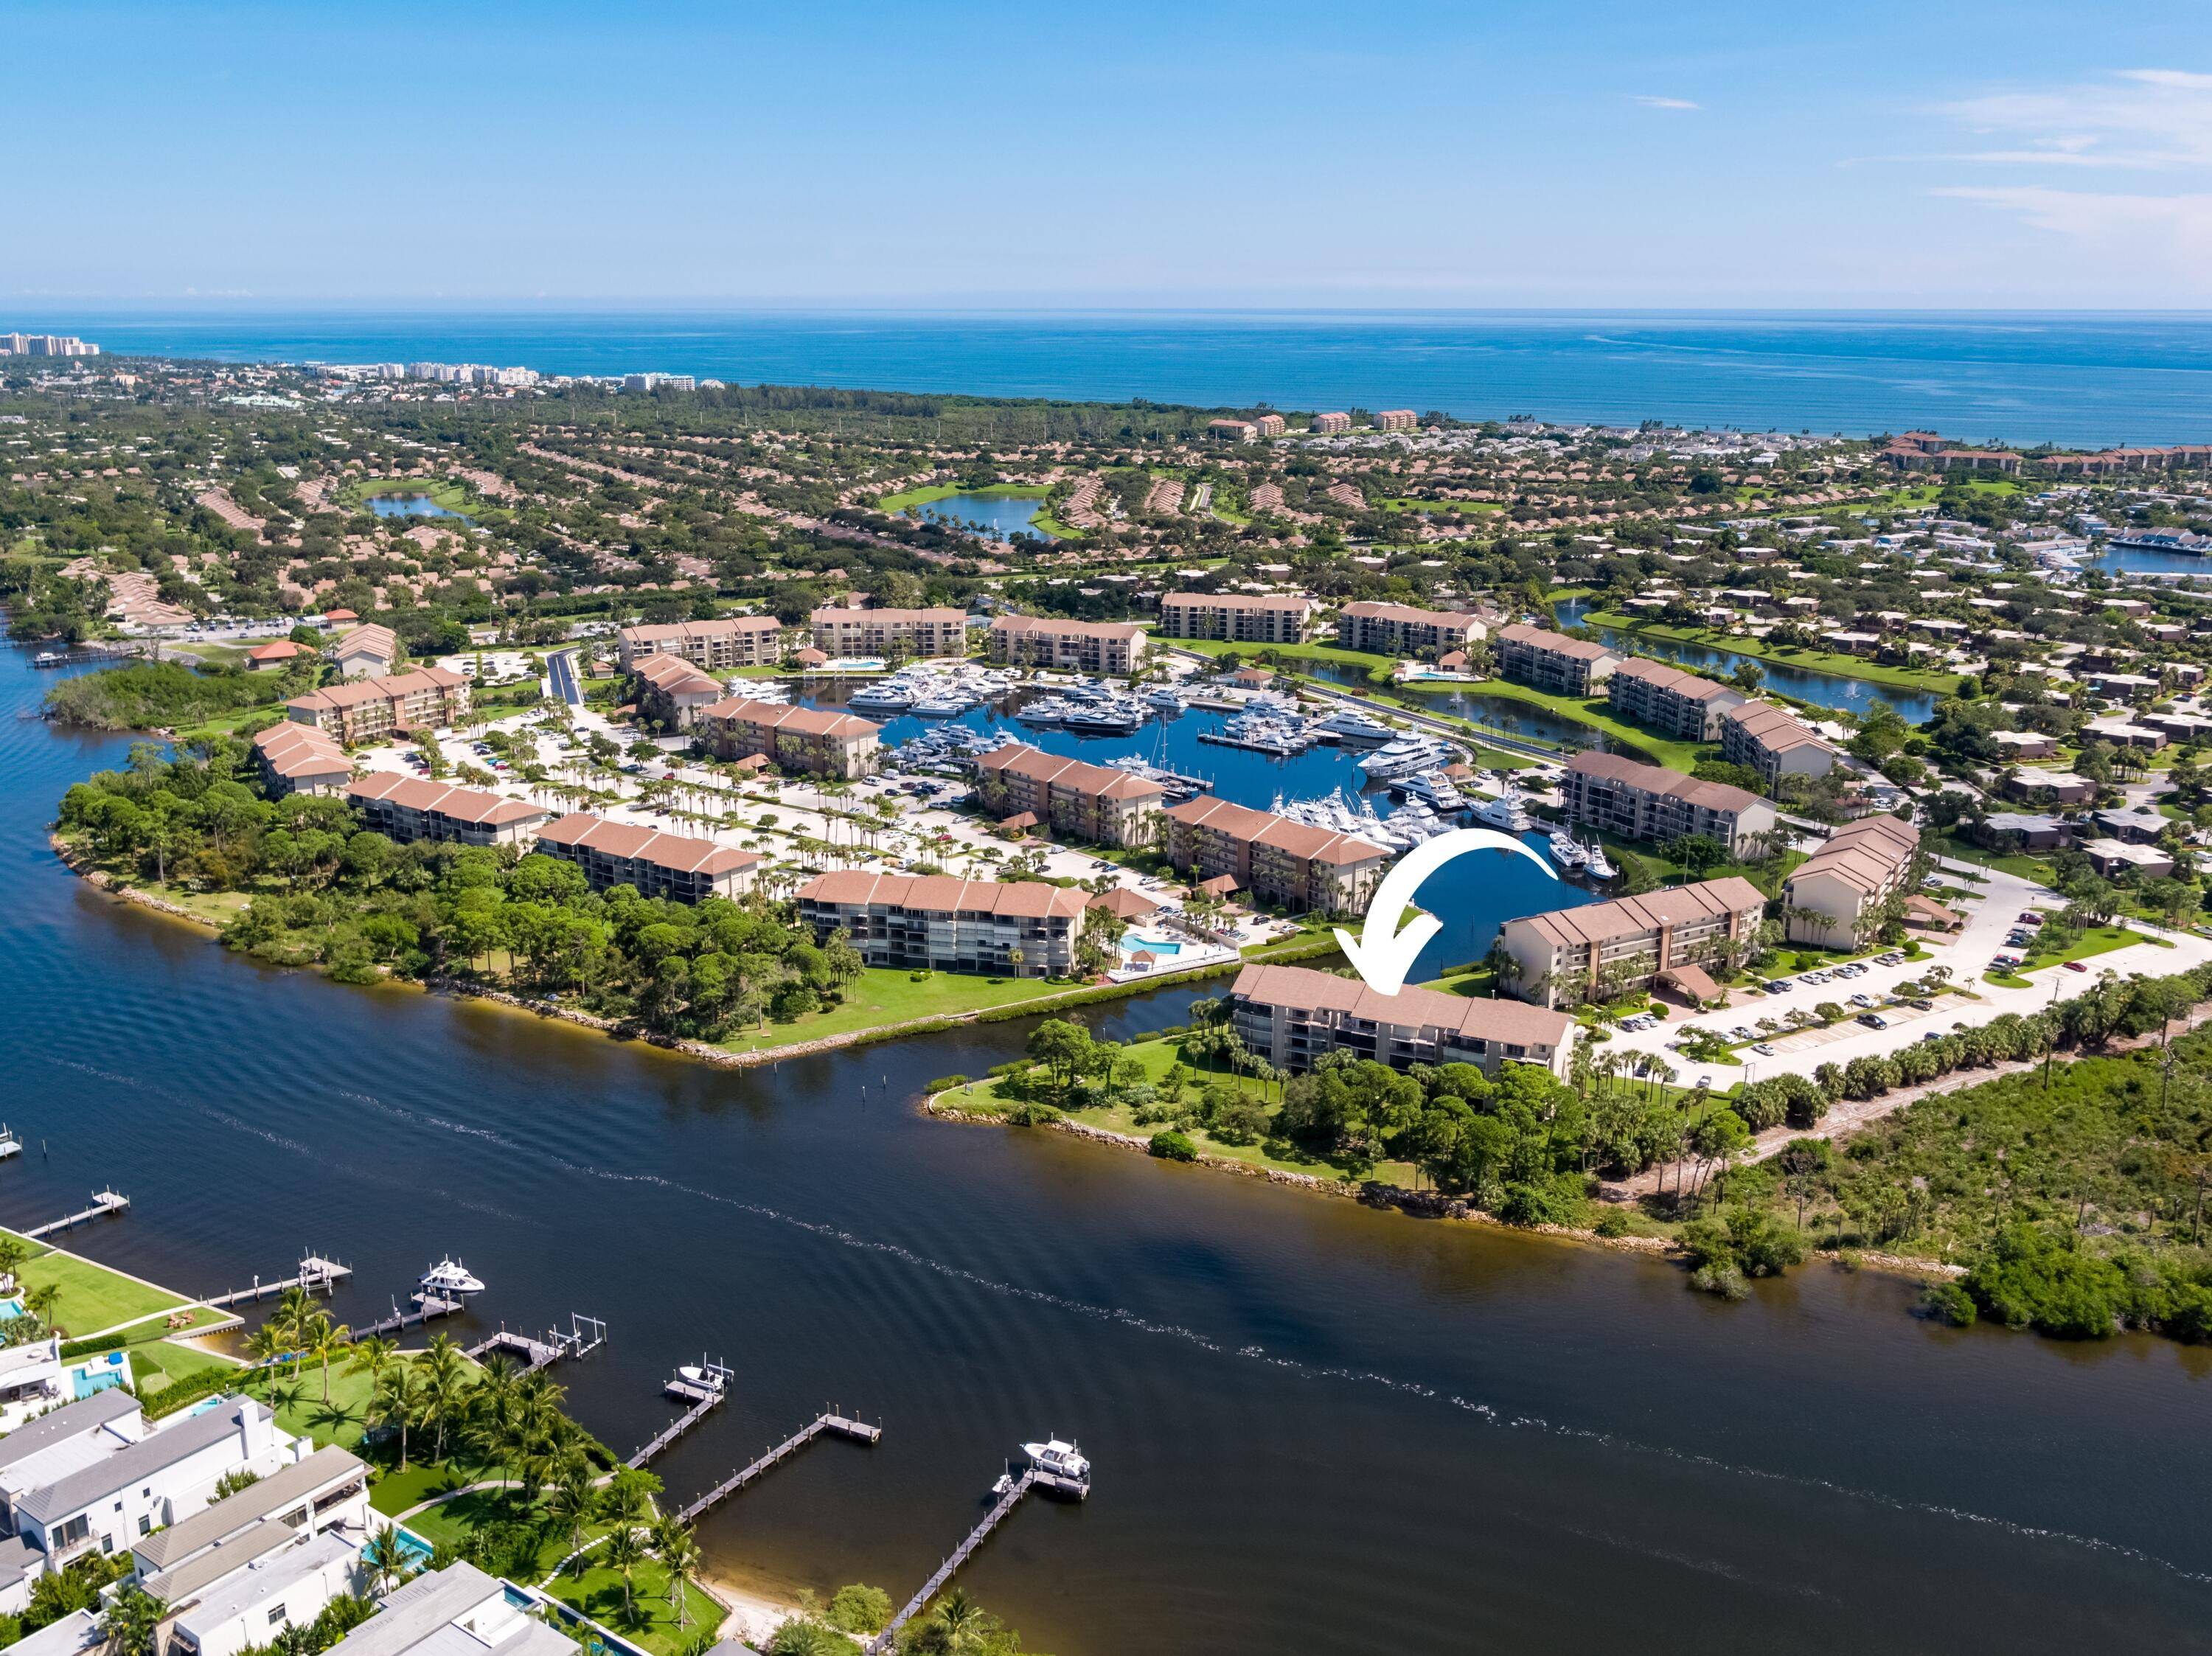 Awesome Intracoastal lush preserve nature area views from this immaculate Bluffs Marina Condo that has been updated.